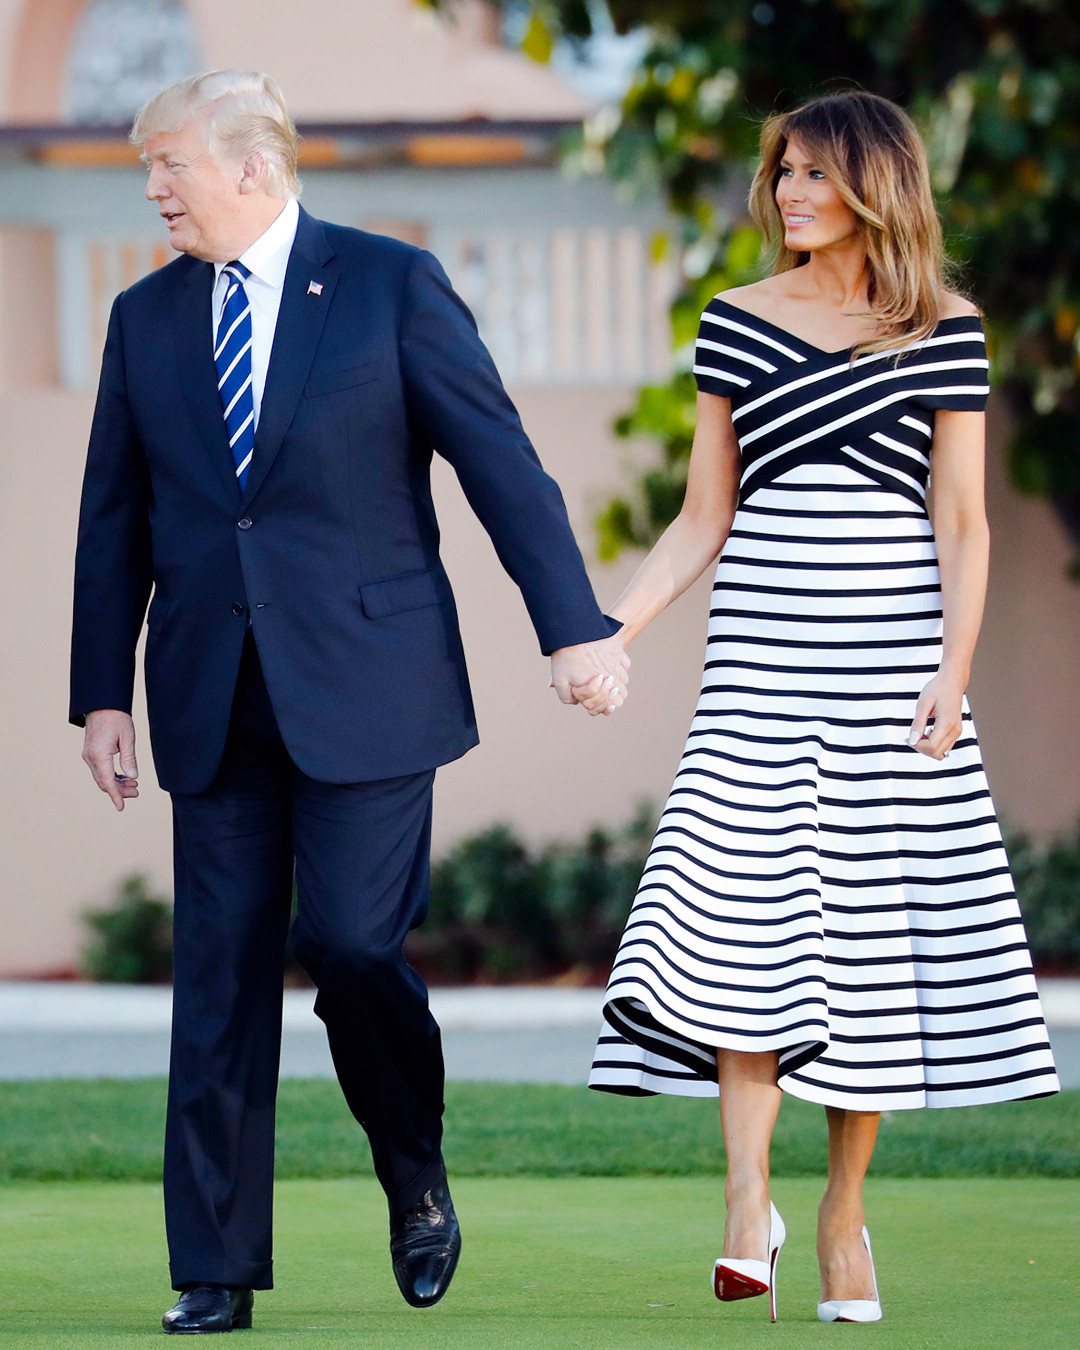 Donald and Melania's Matching Style and More Twinning Celeb Couples - E!  Online